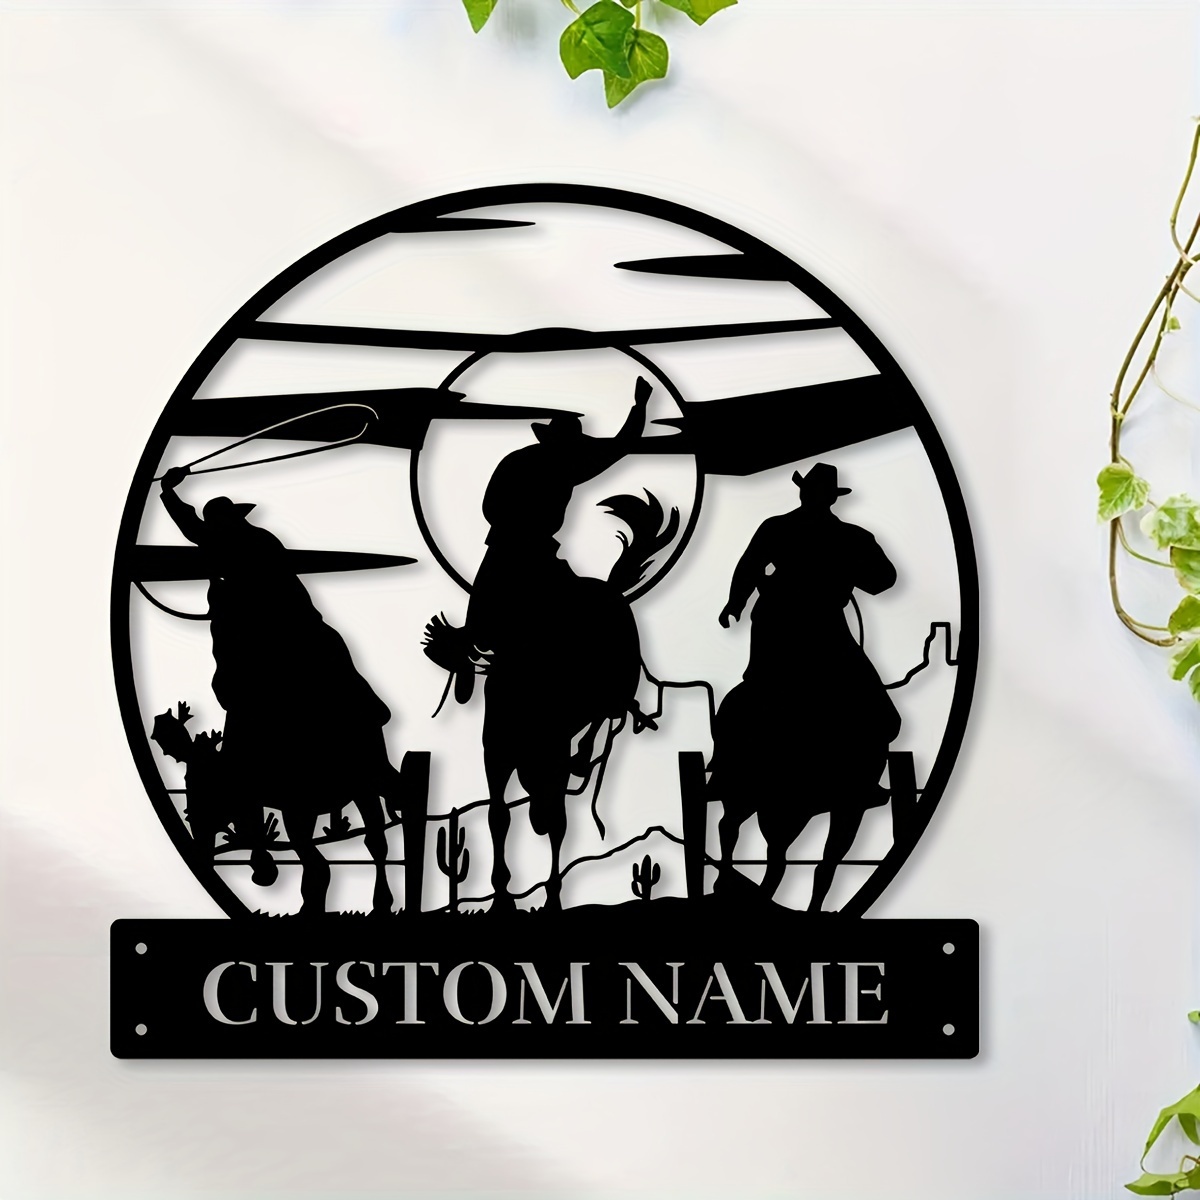 

1pc Custom Western Cowboy Wall Art, Personalized Names Western Cowboy Signs, Farmhouse Wall Decor, Metal Western Cowboy Hand Art, Custom Names Wall Decor For Porches, Patio, Gifts